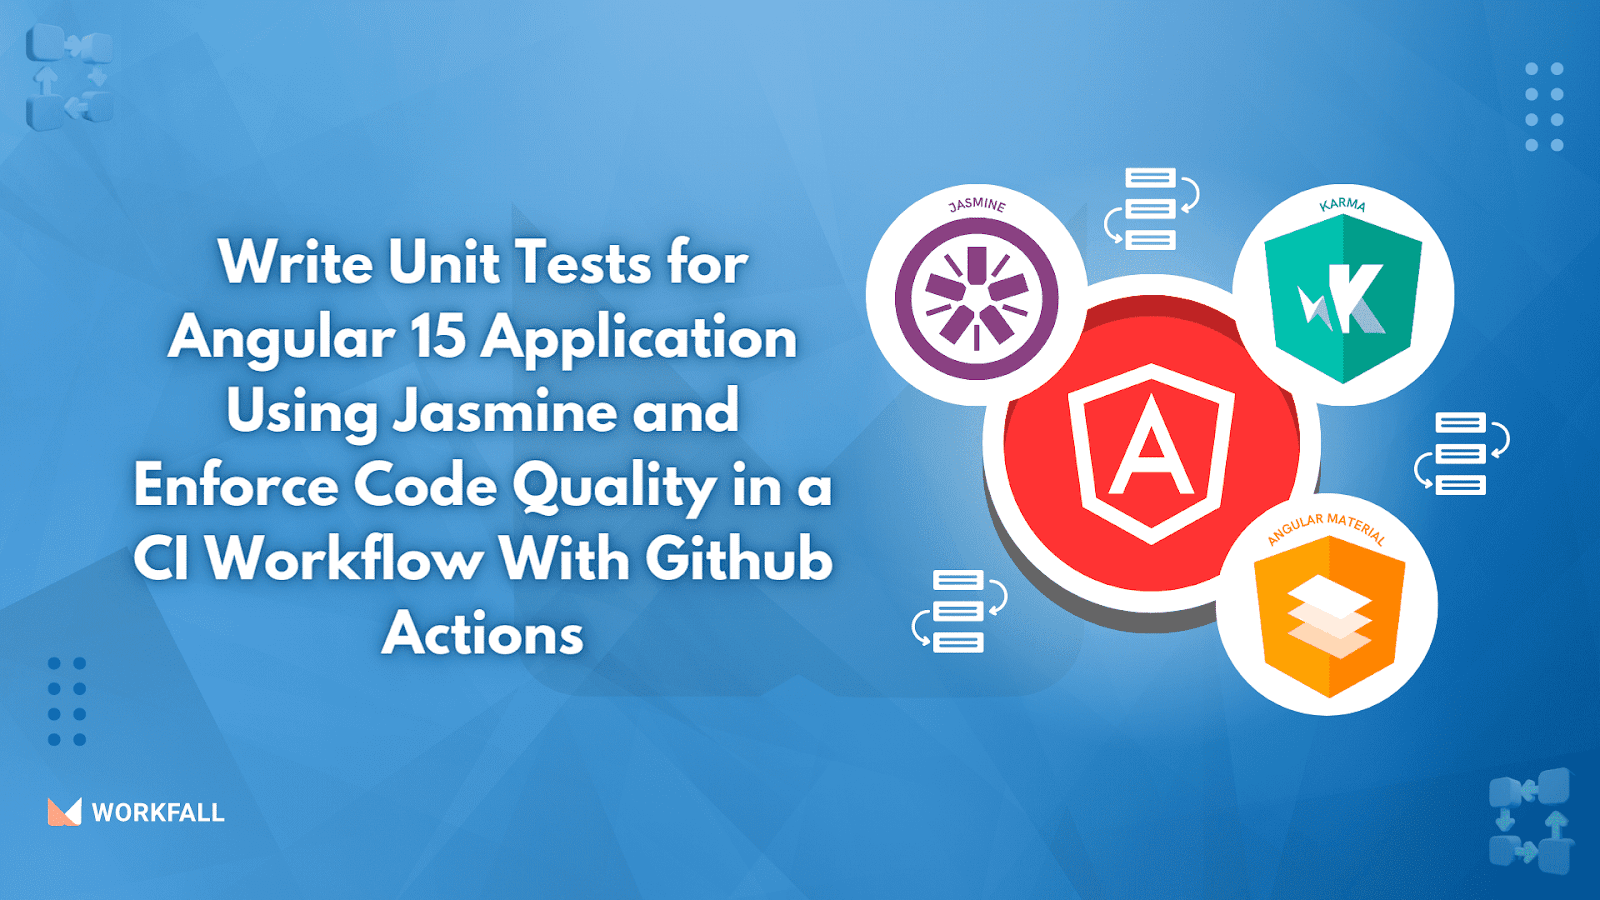 How to Write Unit Tests for Angular 15 Application Using Jasmine and Enforce Code Quality in a CI Workflow Github Actions? - The Blog